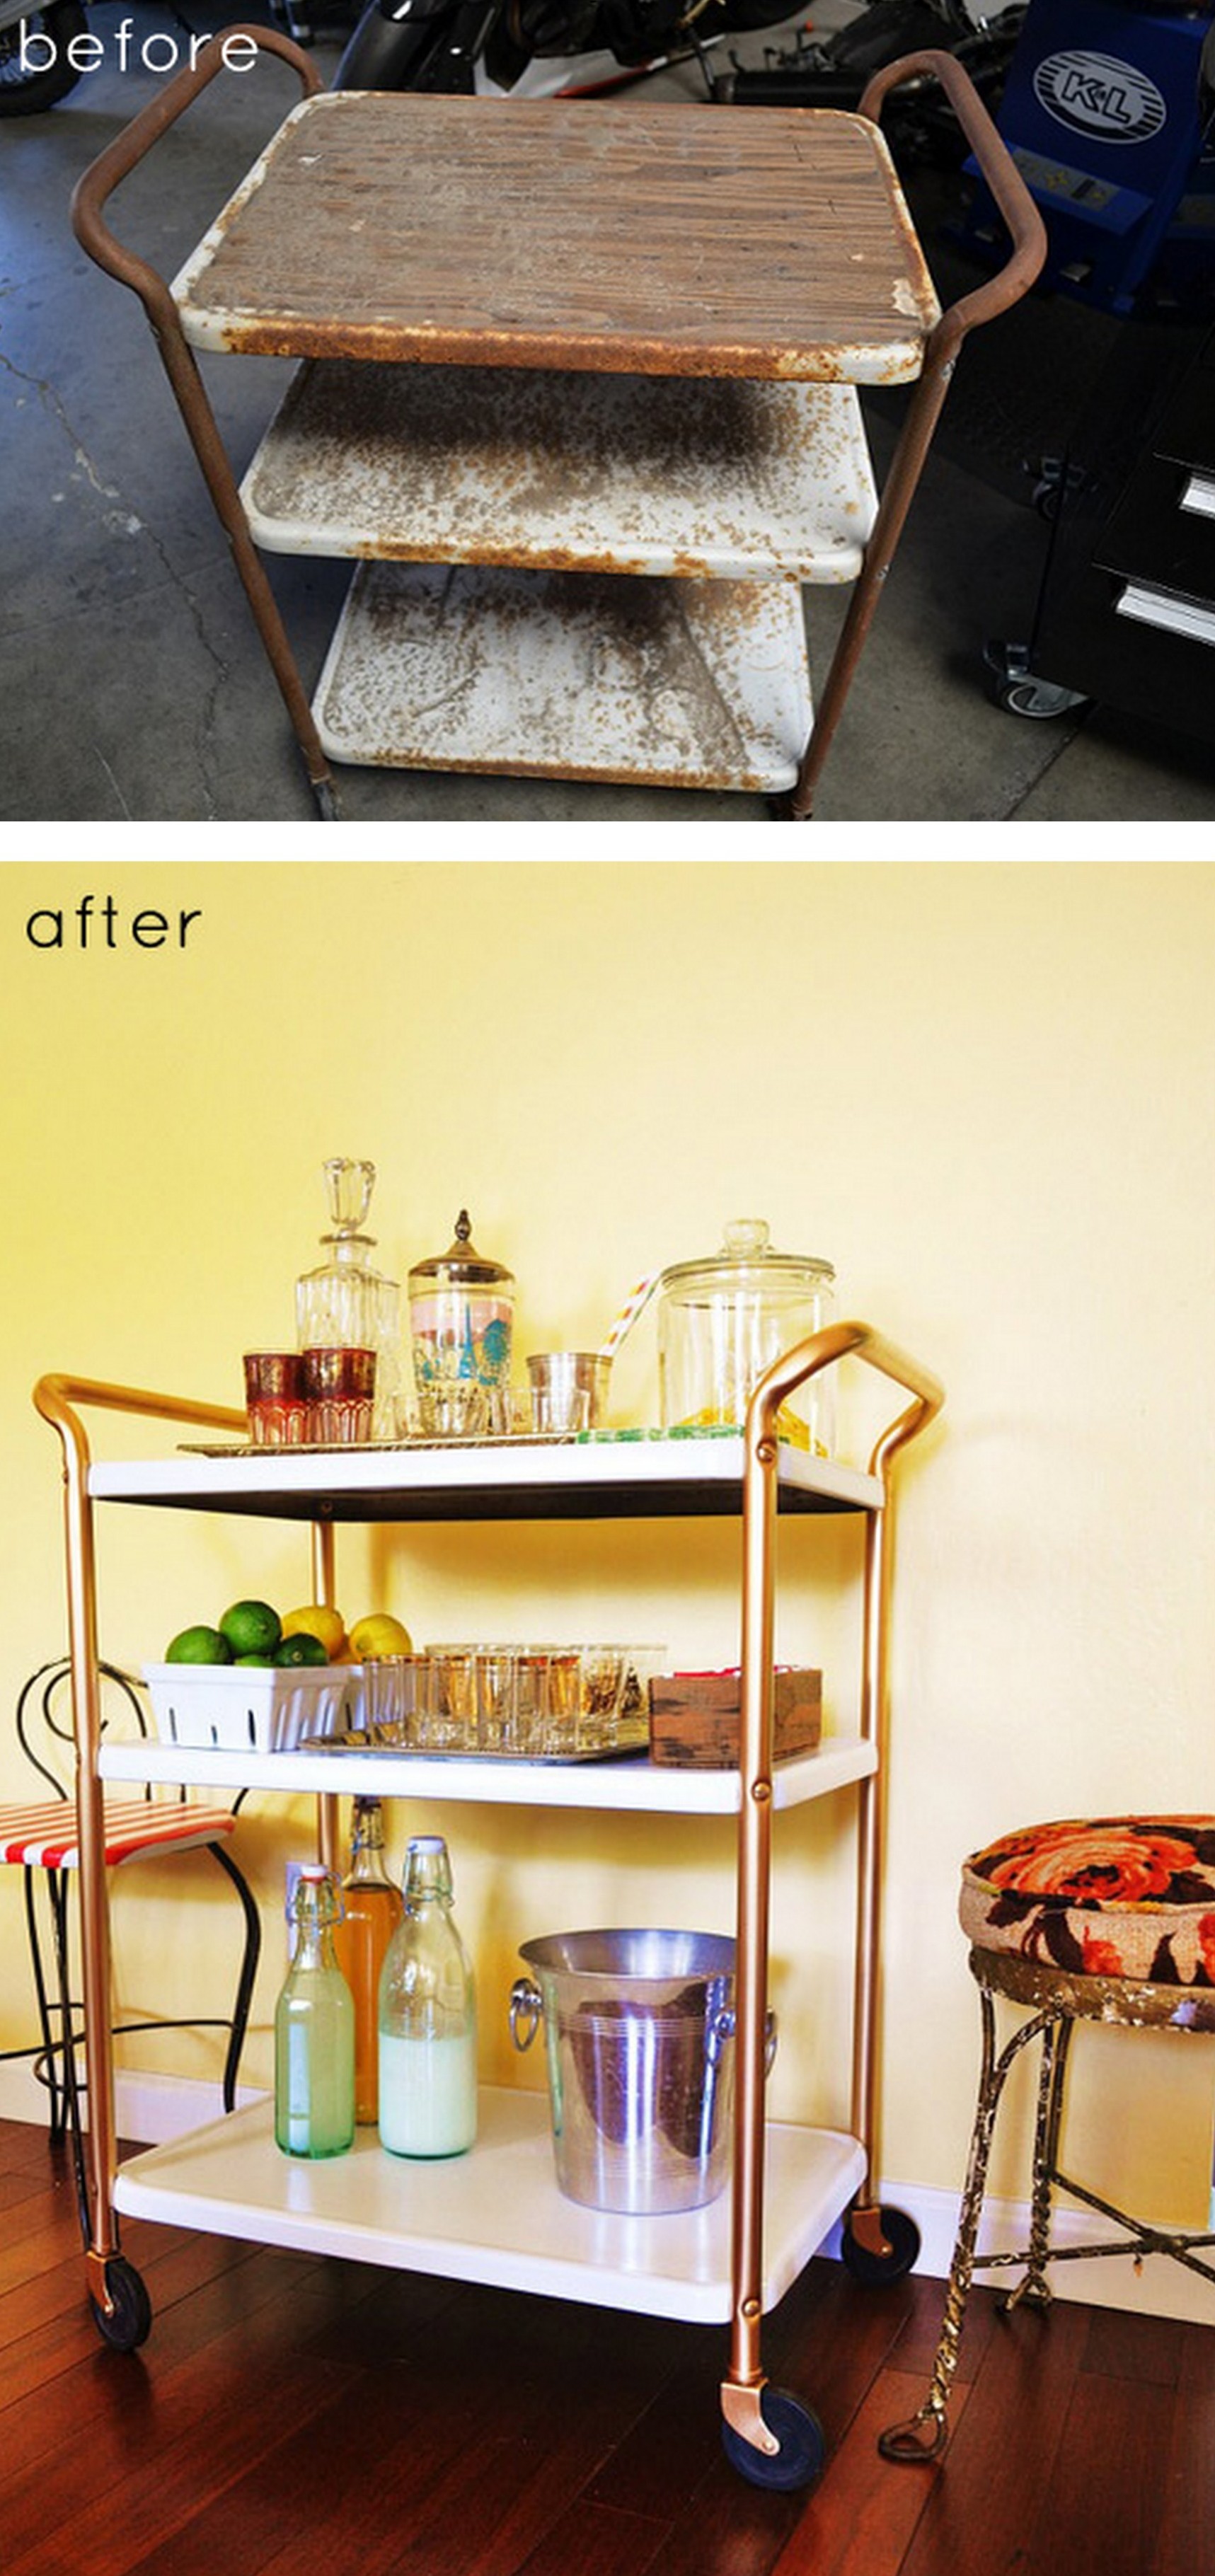 5 Surfaces To Spray Paint Jenna, How To Spray Paint Metal Shelves